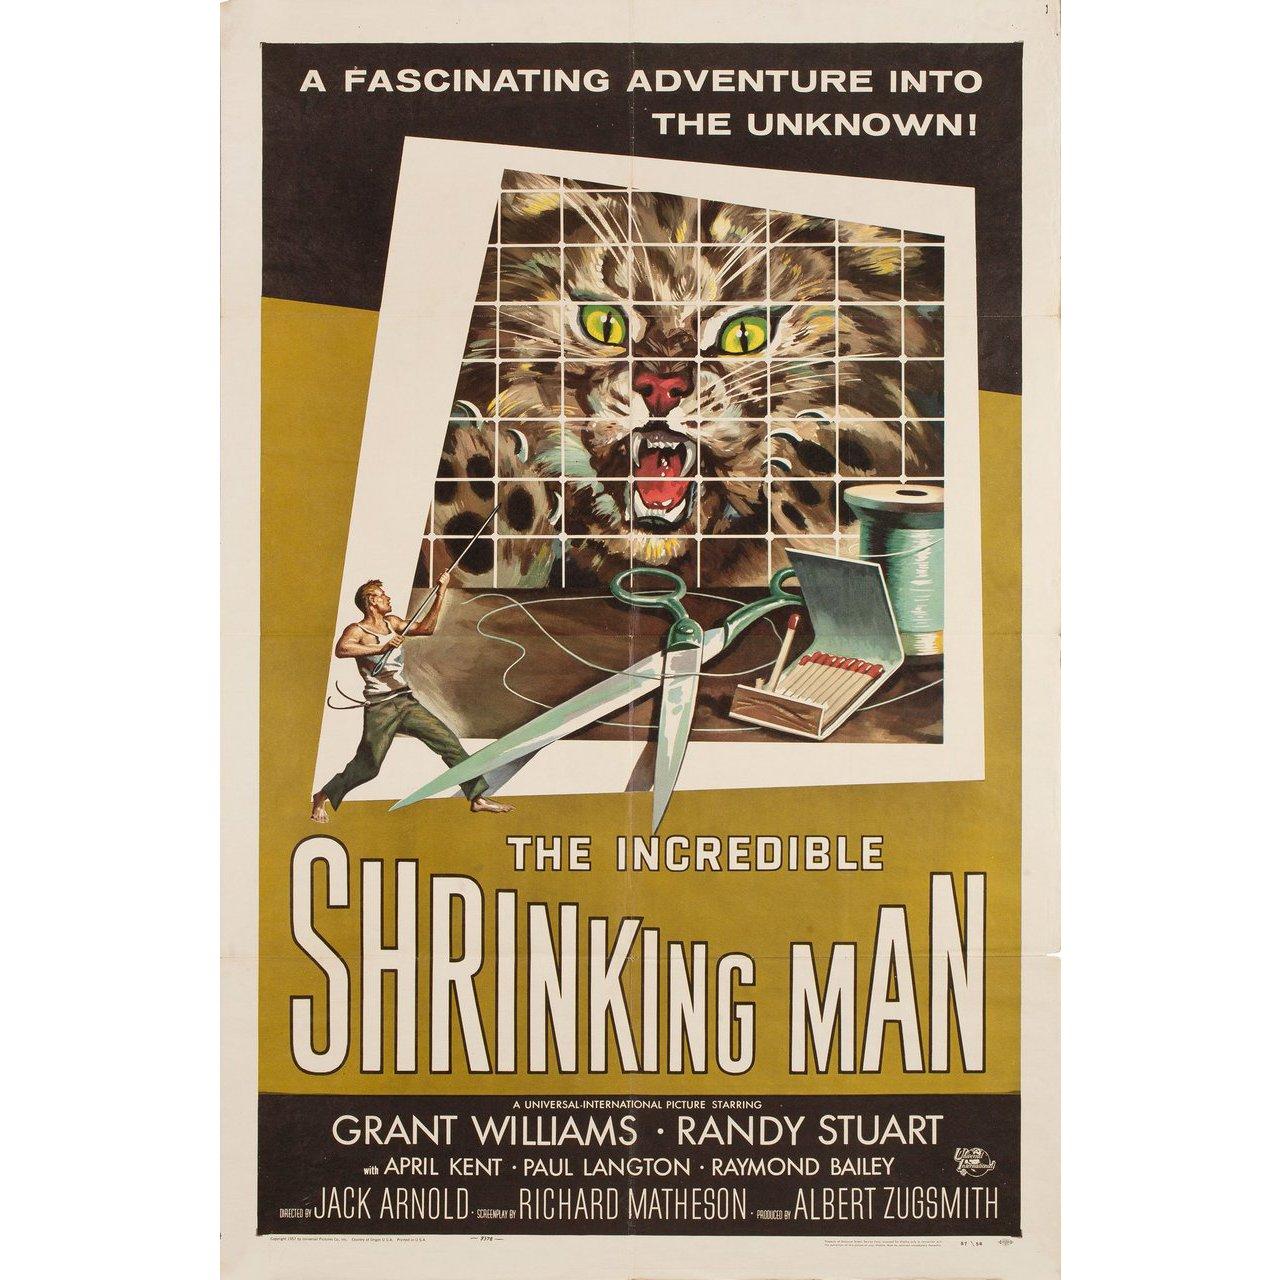 Original 1957 U.S. one sheet poster by Reynold Brown for the film The Incredible Shrinking Man directed by Jack Arnold with Grant Williams / Randy Stuart / April Kent / Paul Langton. Very Good condition, folded. Many original posters were issued